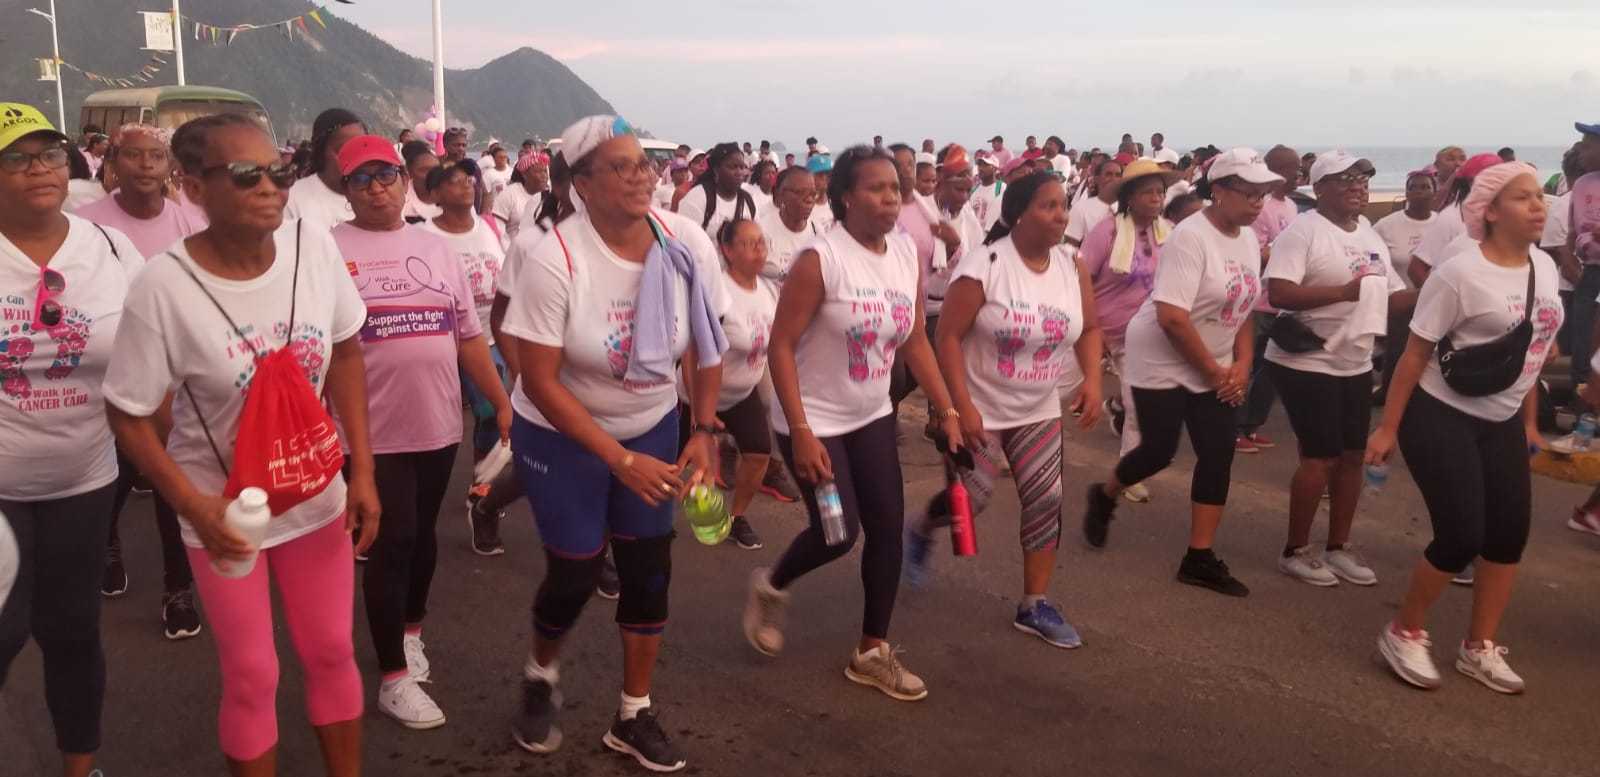 Annual Cancer Walk Attracts Wide Cross Section Population